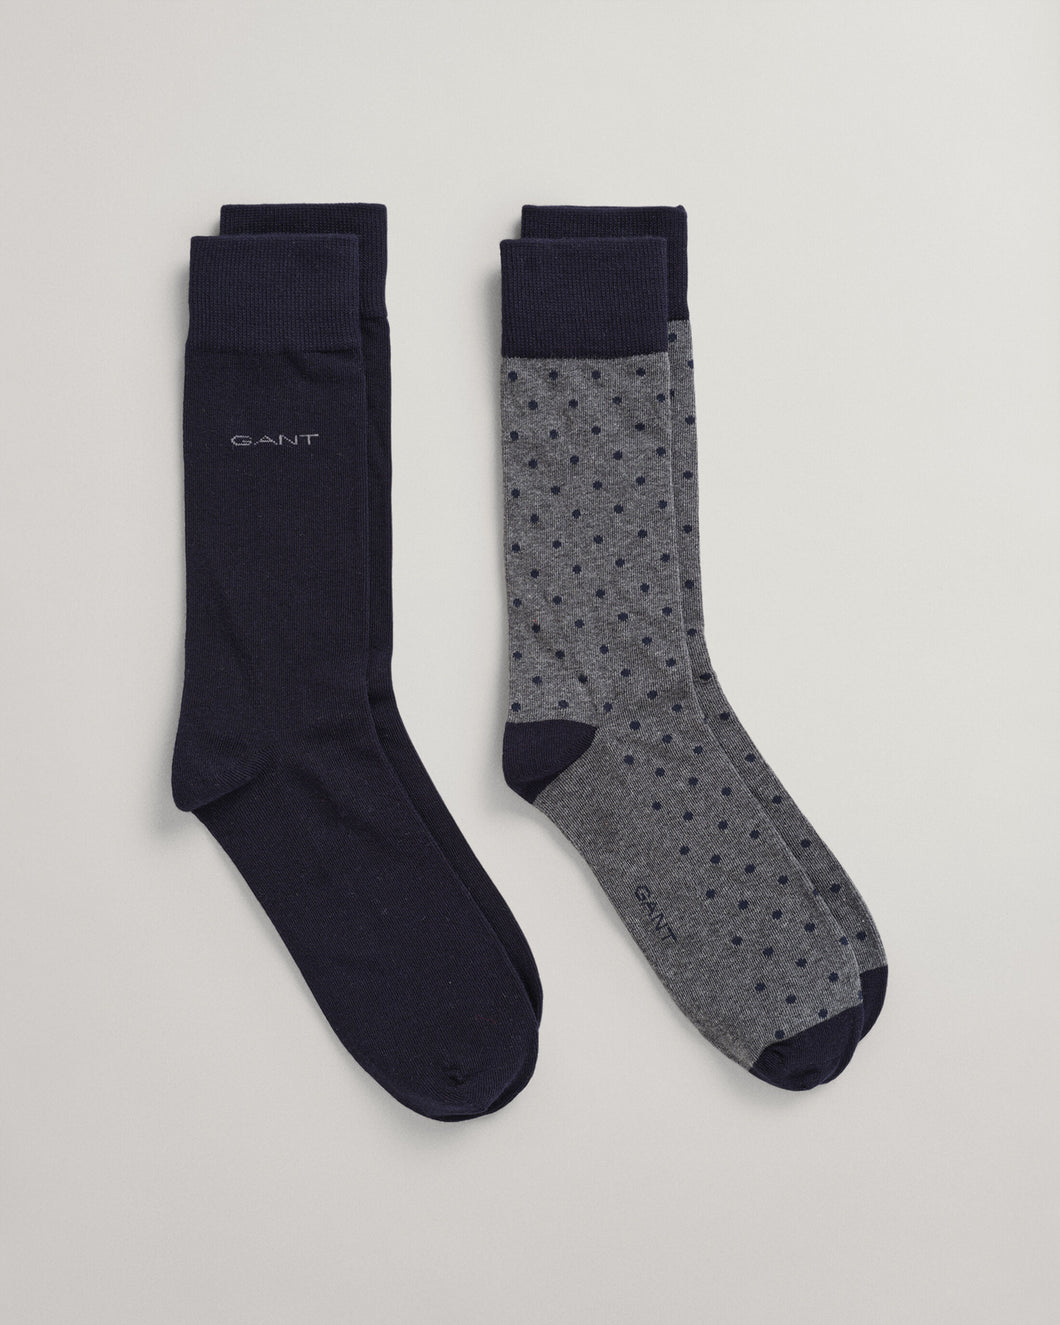 GANT - 2-Pack Solid And Dot Socks, Charcoal